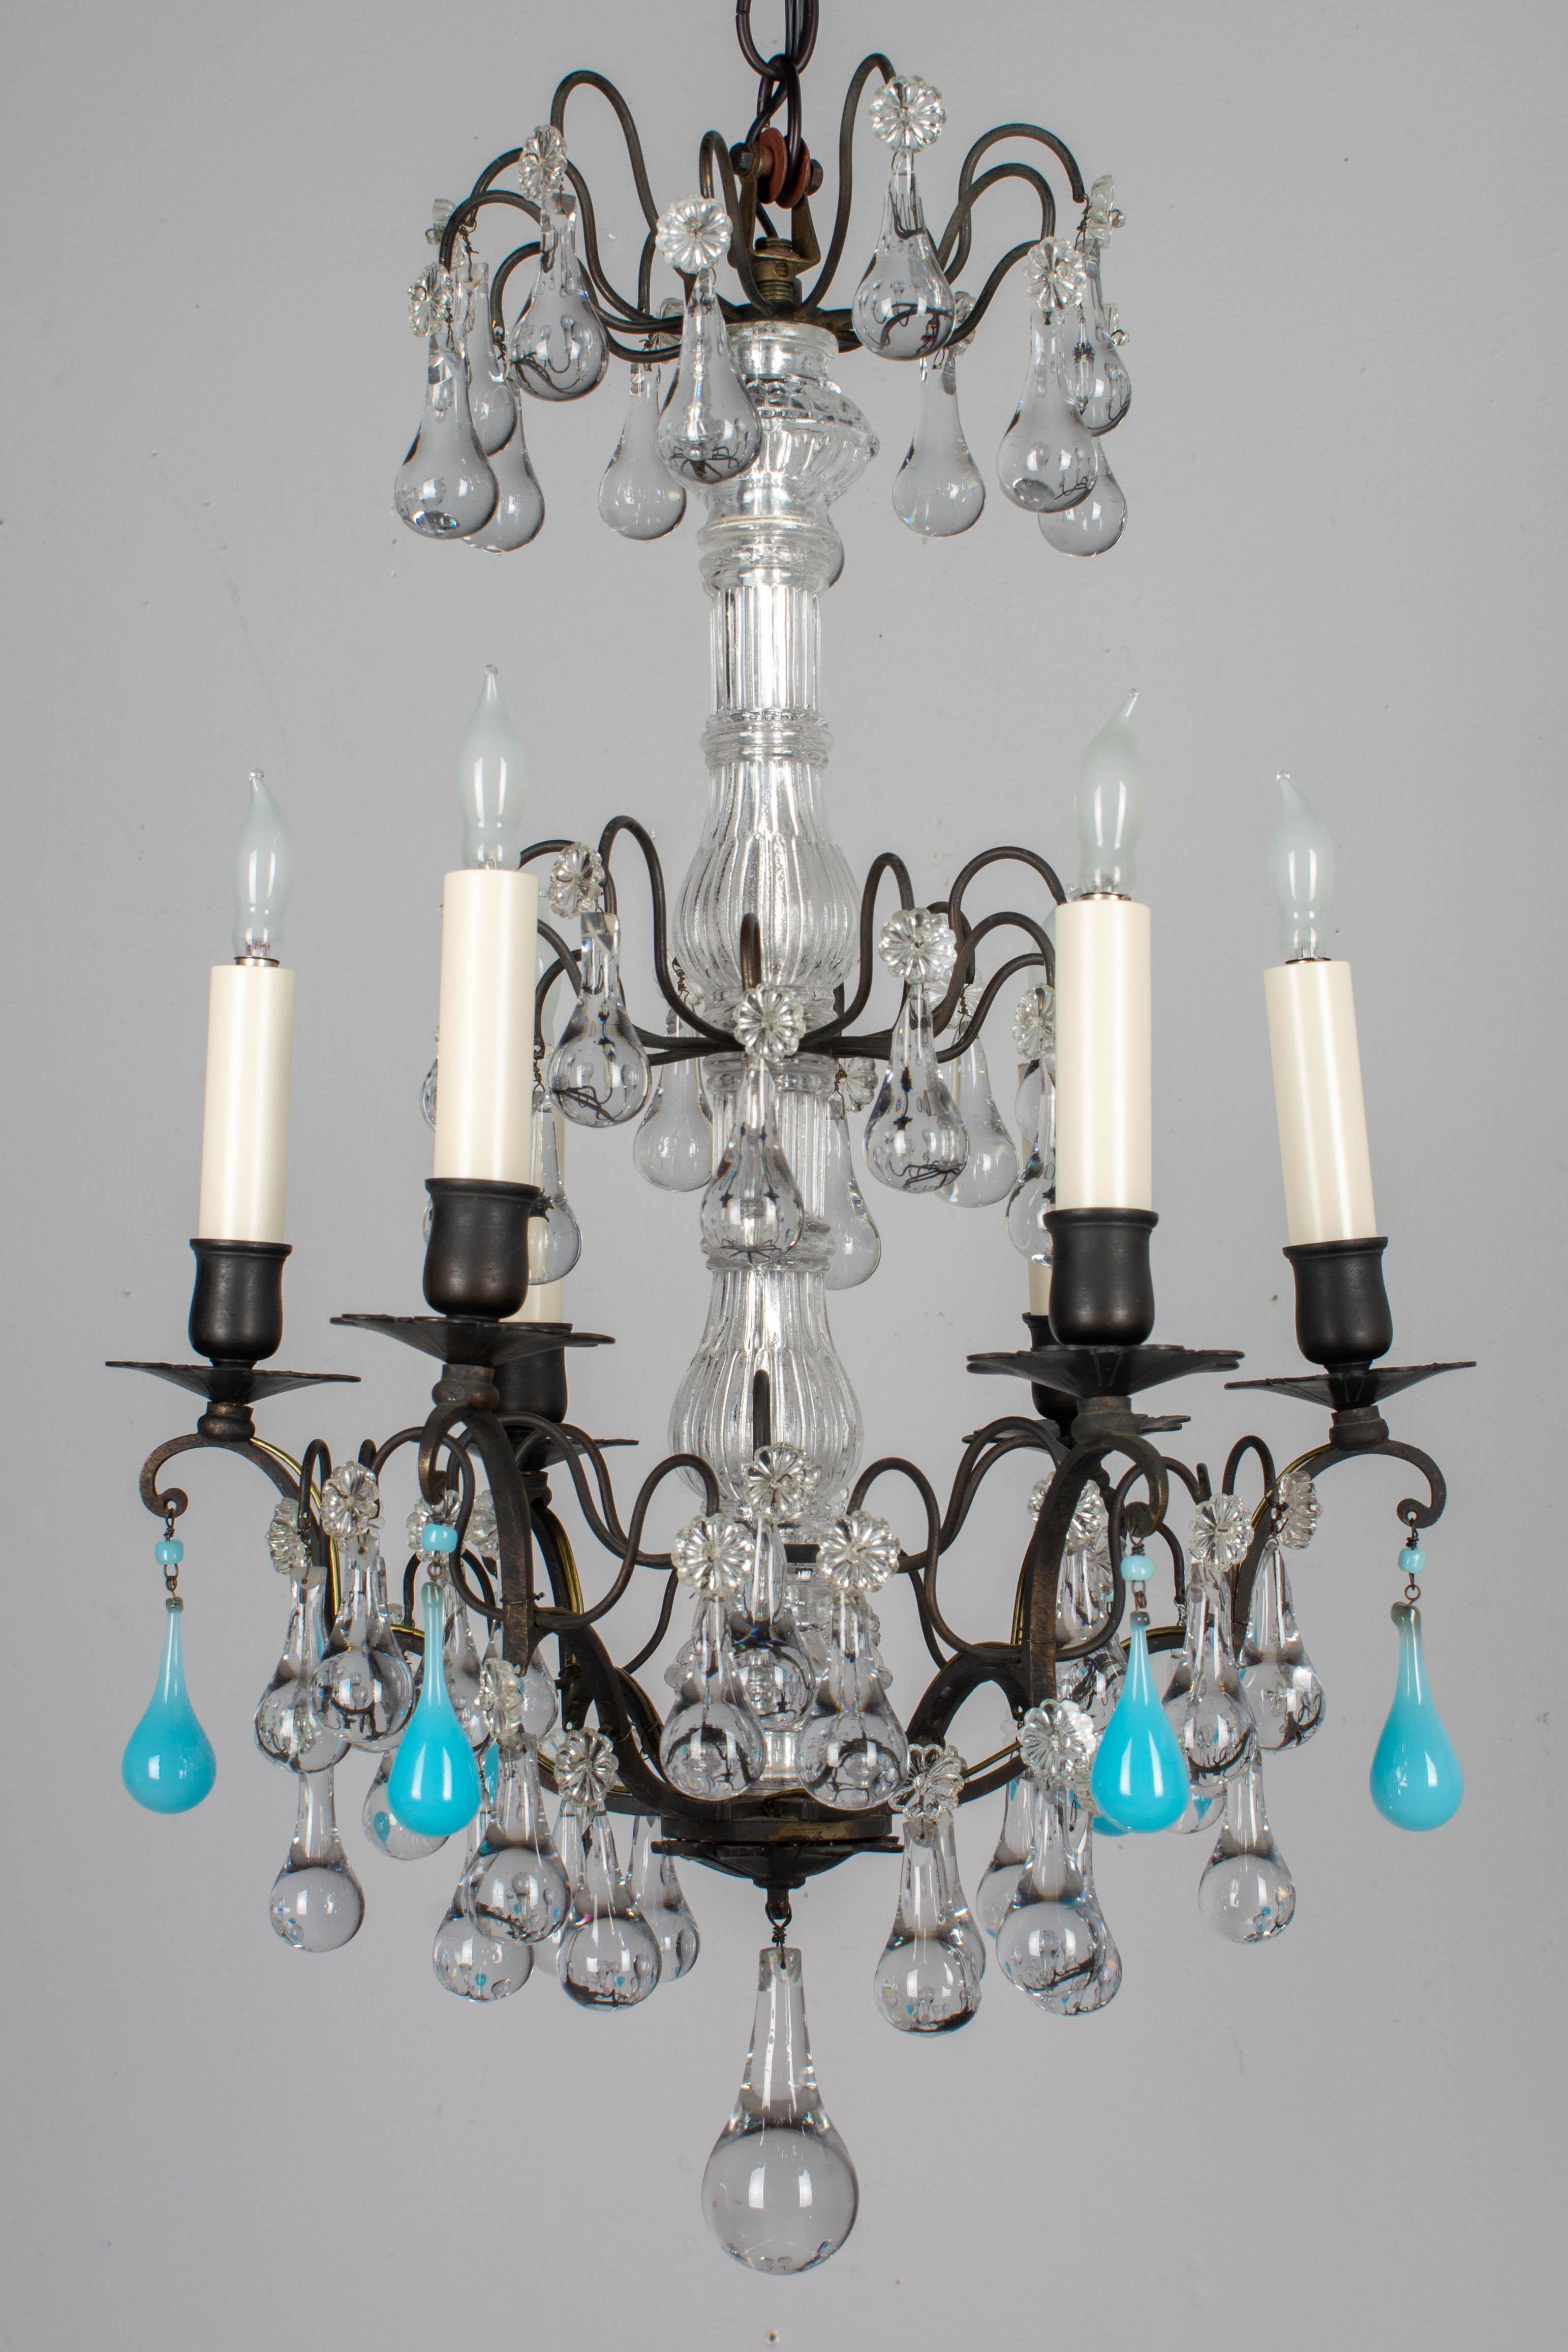 A French Louis XV style six-light chandelier with clear glass teardrops, rosettes and columns and accented with six turquoise blue glass teardrops. All original, as found. Brass frame with dark bronze patina. Rewired with new sockets and candle